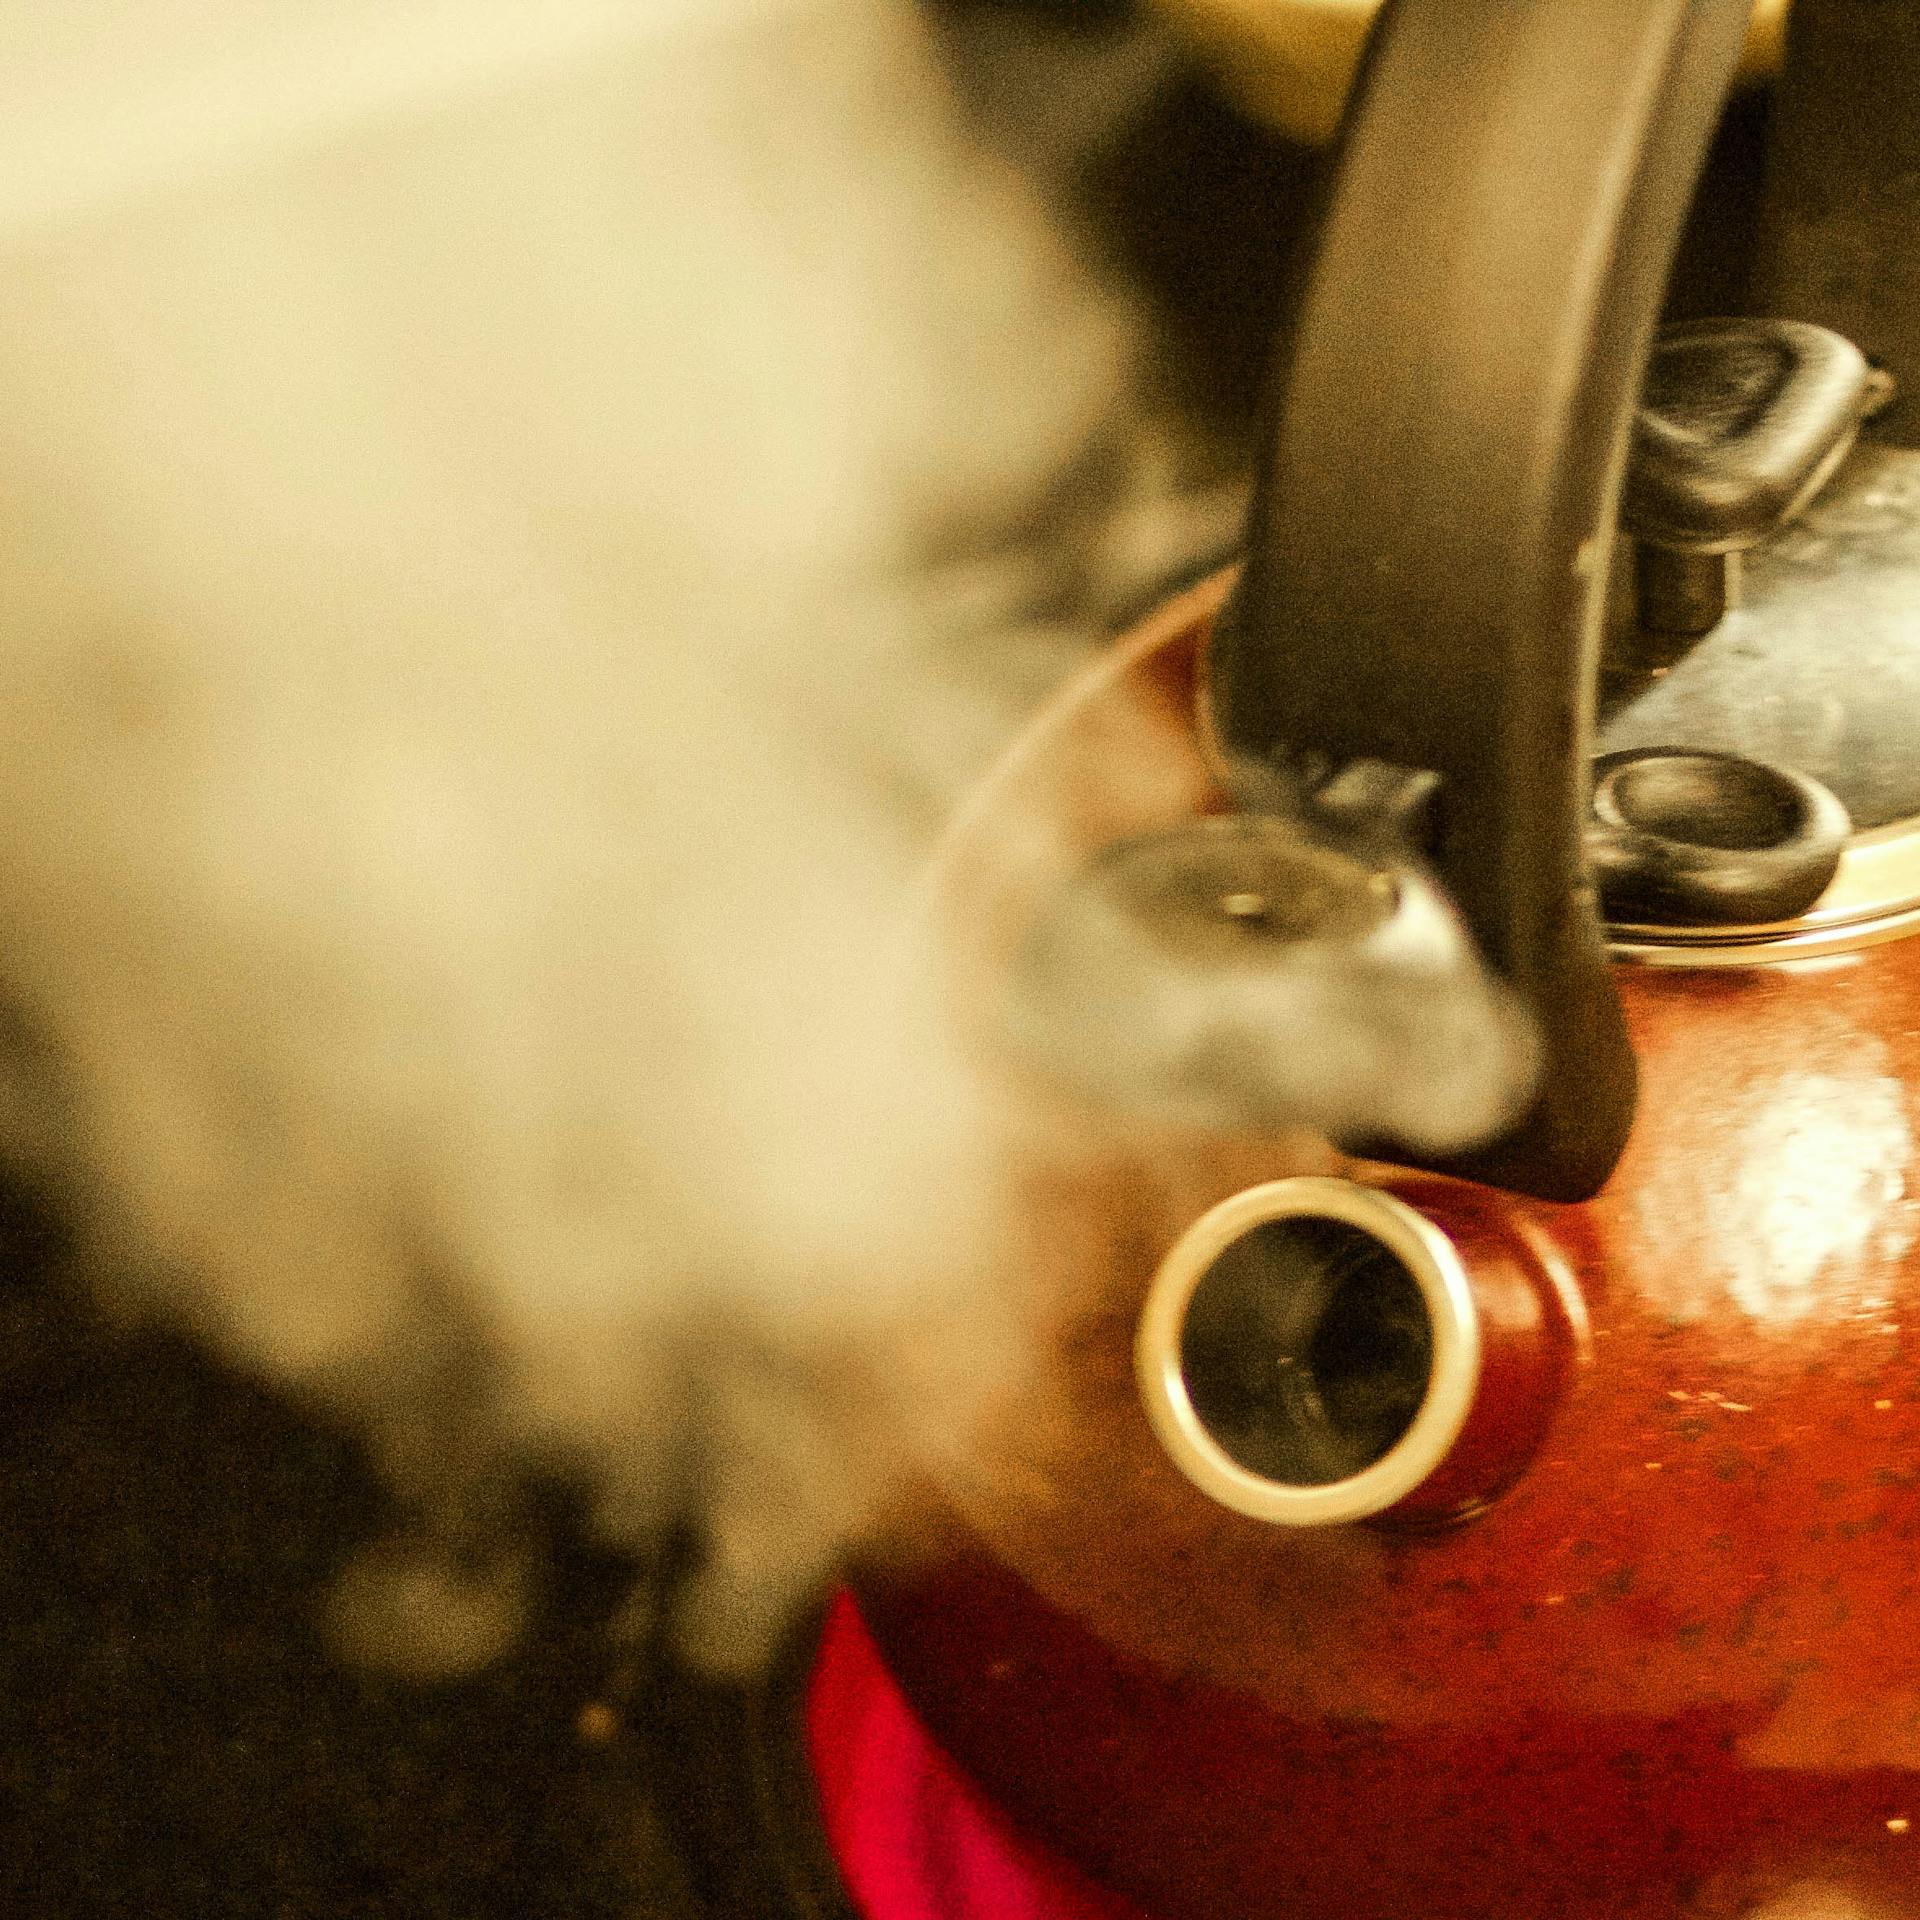 Steam from a kettle | Source: Pexels